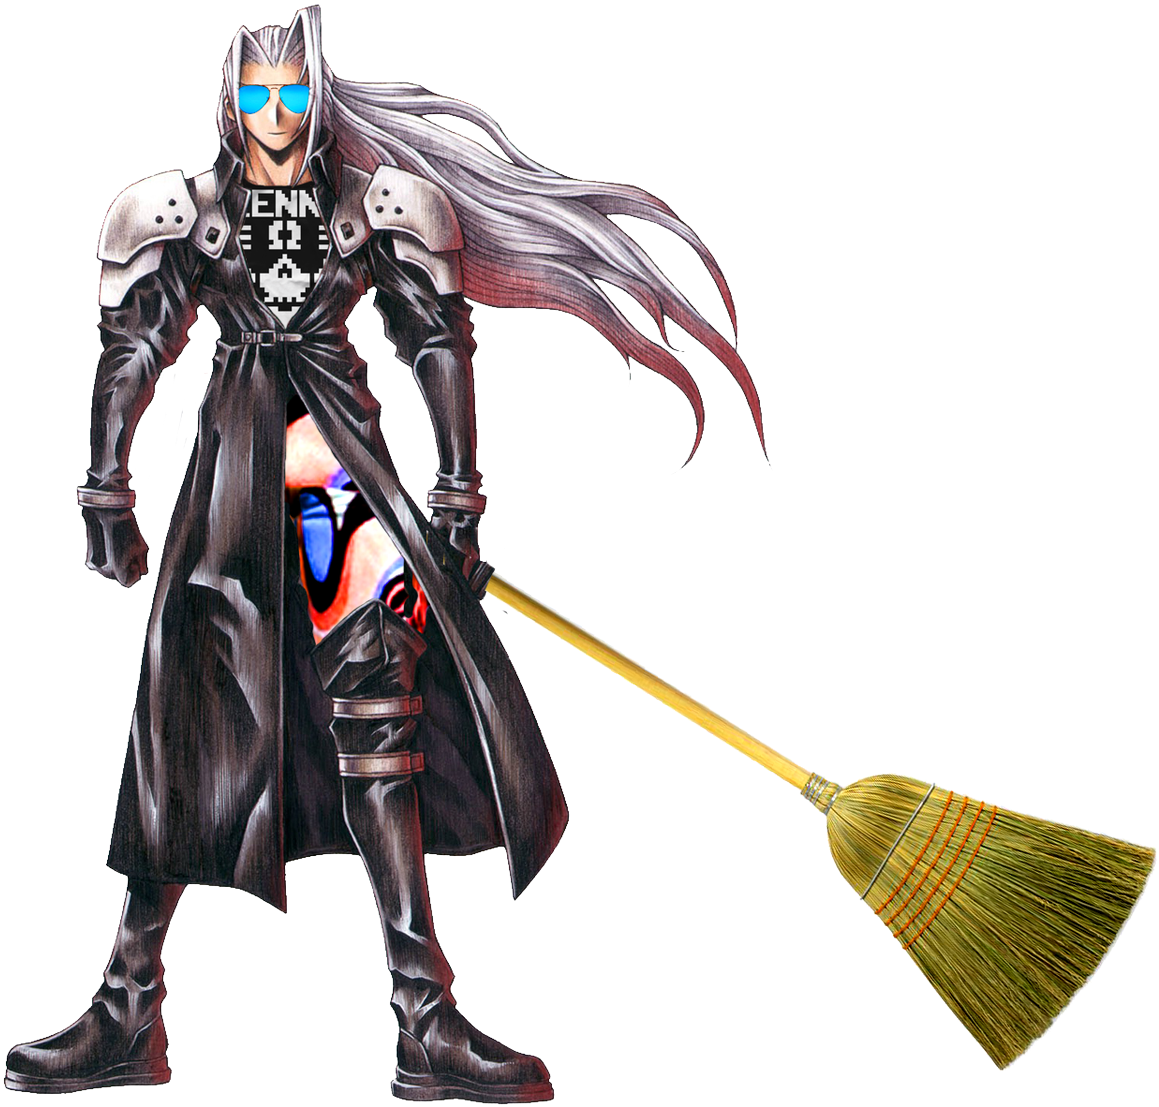 Kenny Omega On Twitter - Final Fantasy Vii Sephiroth Deluxe Cosplay Costume (1200x1124), Png Download